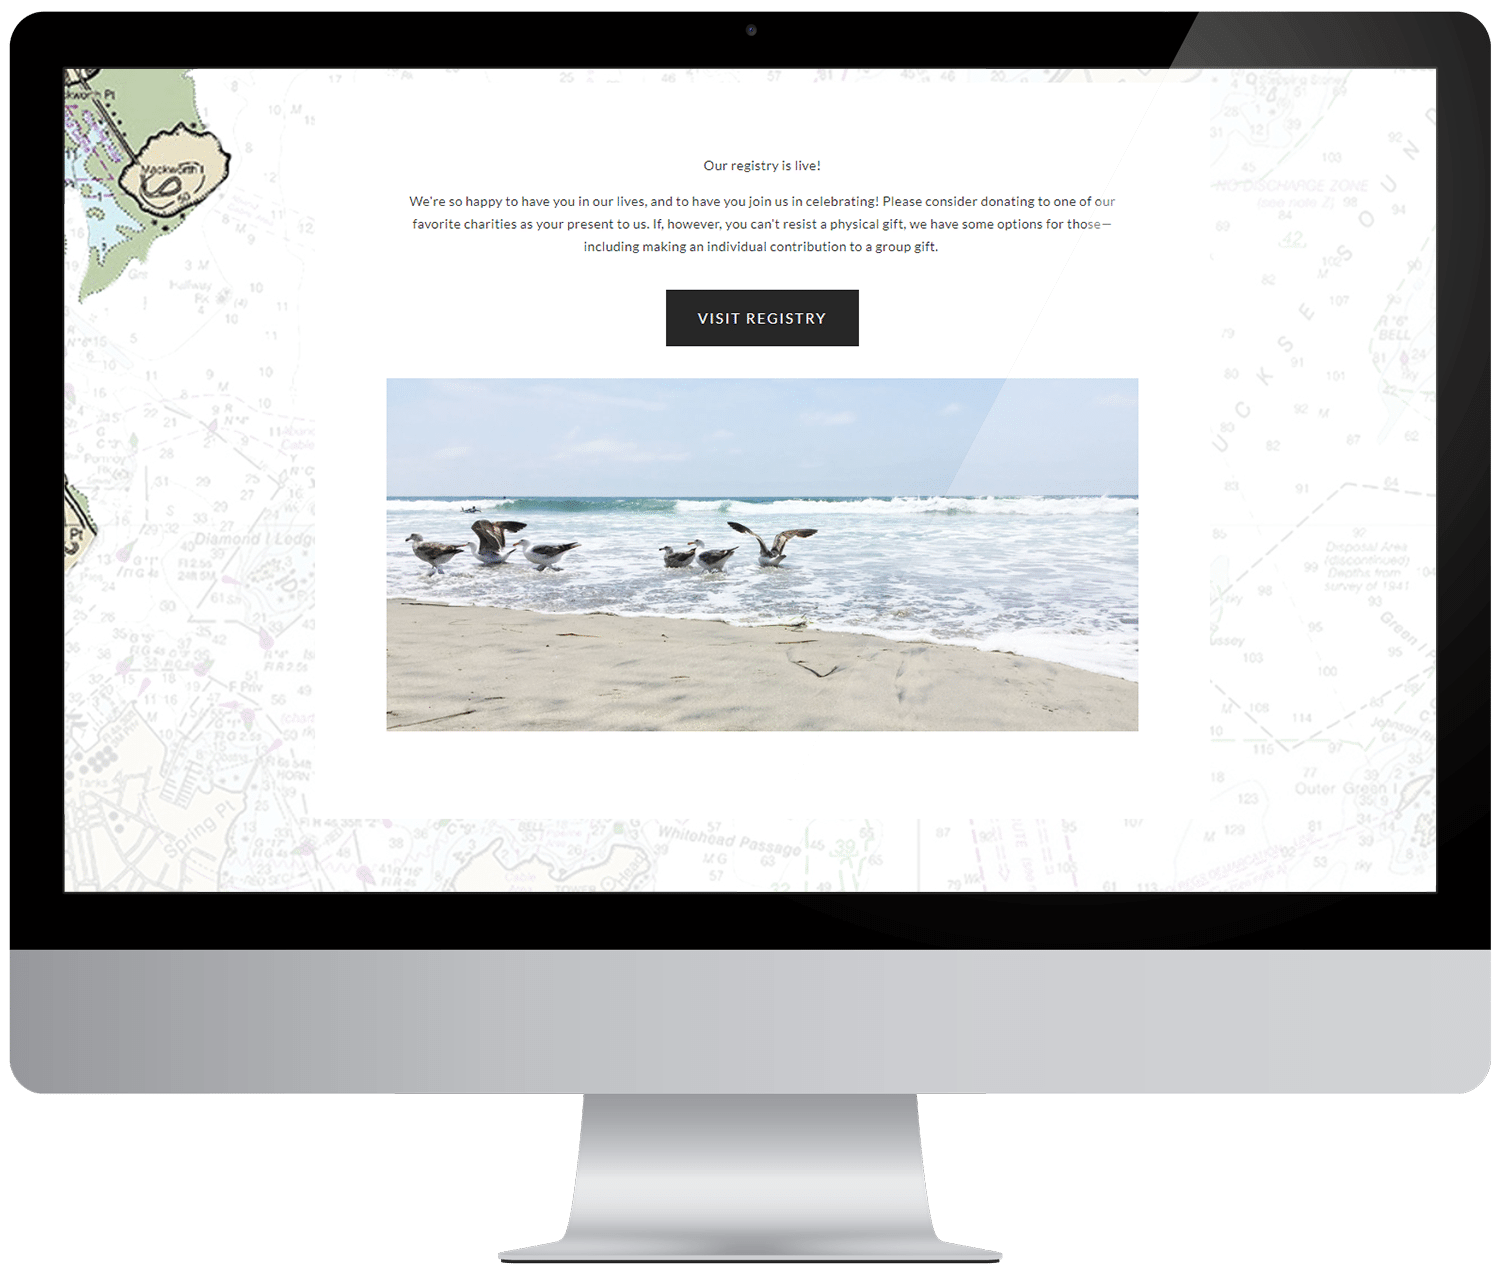 A Squarespace wedding website registry page as seen on a computer monitor